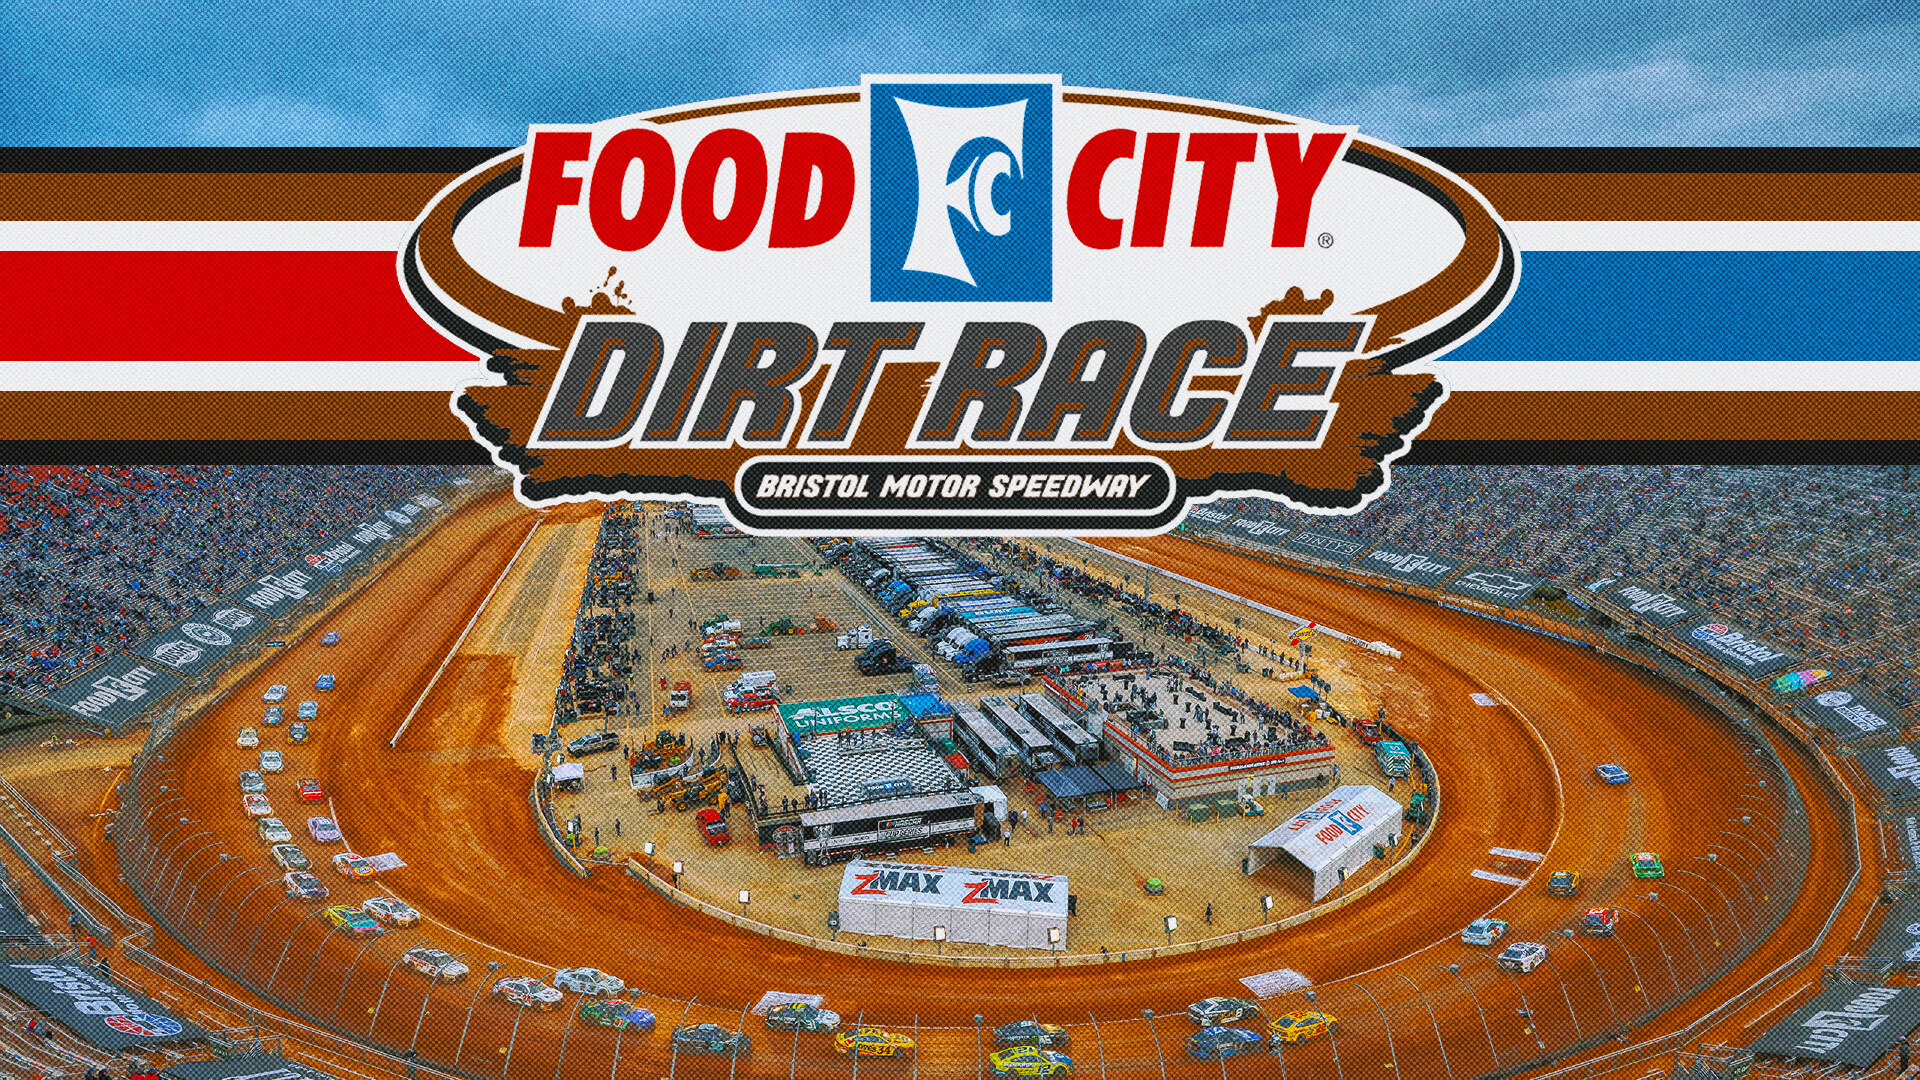 Food City Dirt Race live updates: Top moments from Bristol Motor Speedway